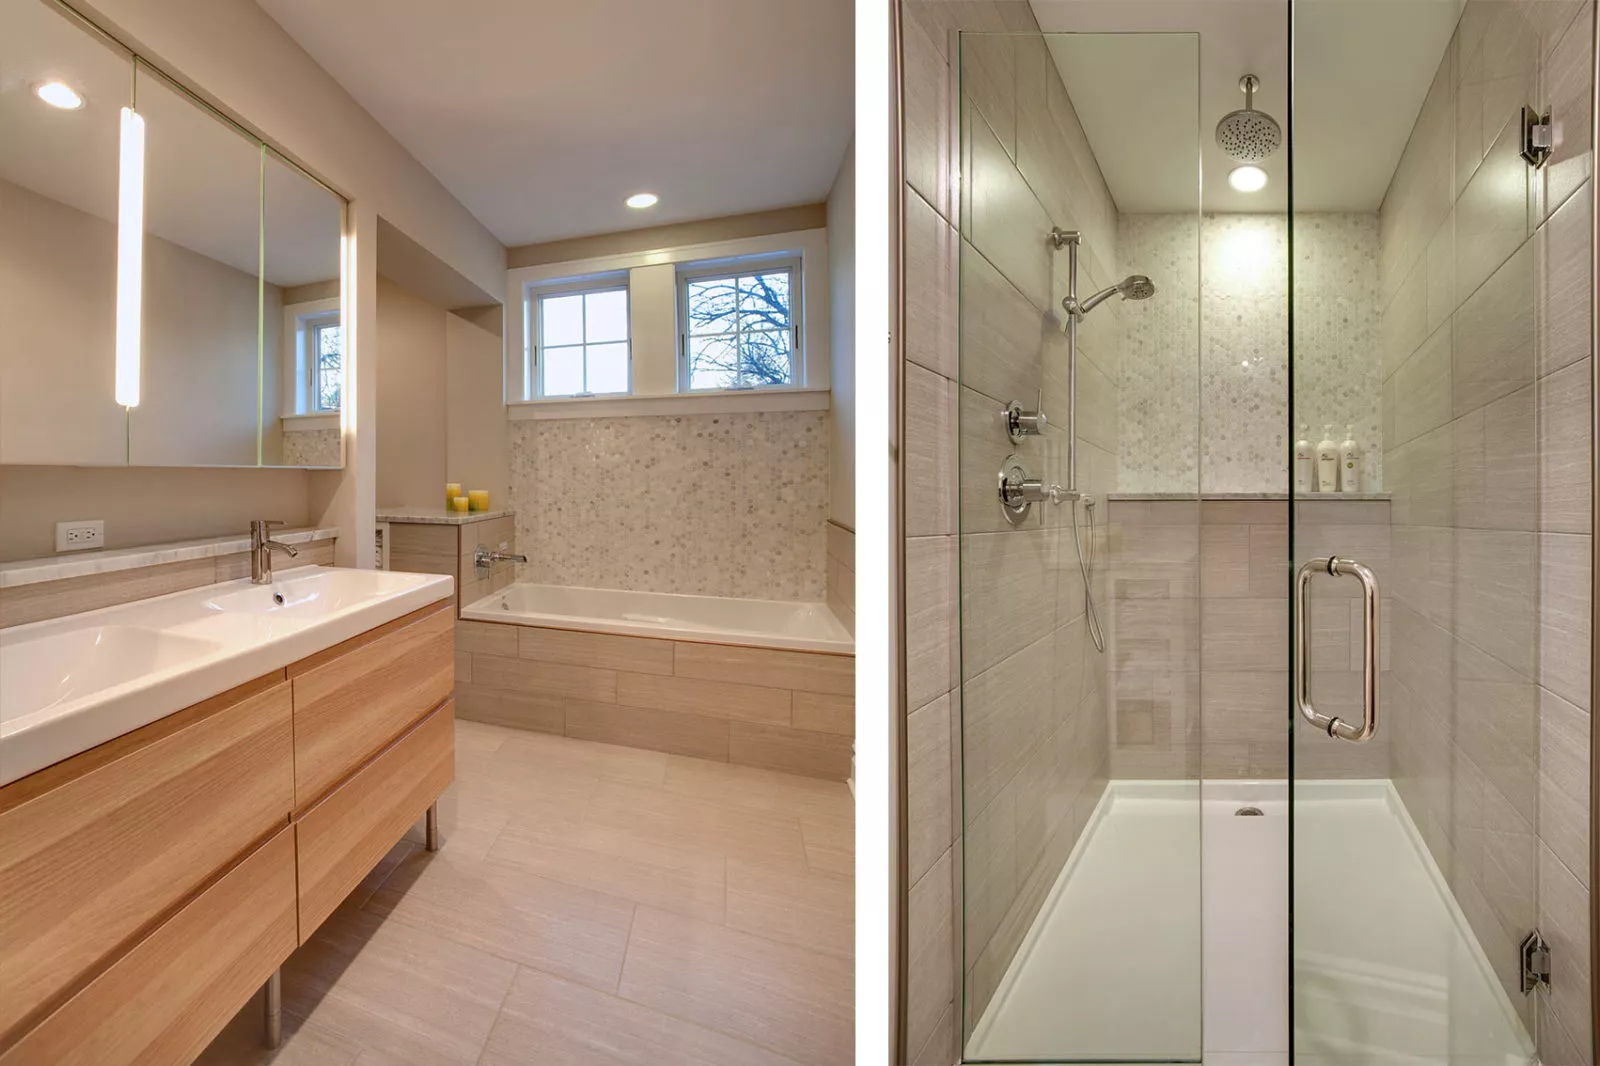 Bathroom with built-in bathtub, two sinks with mirrors, shower with glass door and grey tile walls